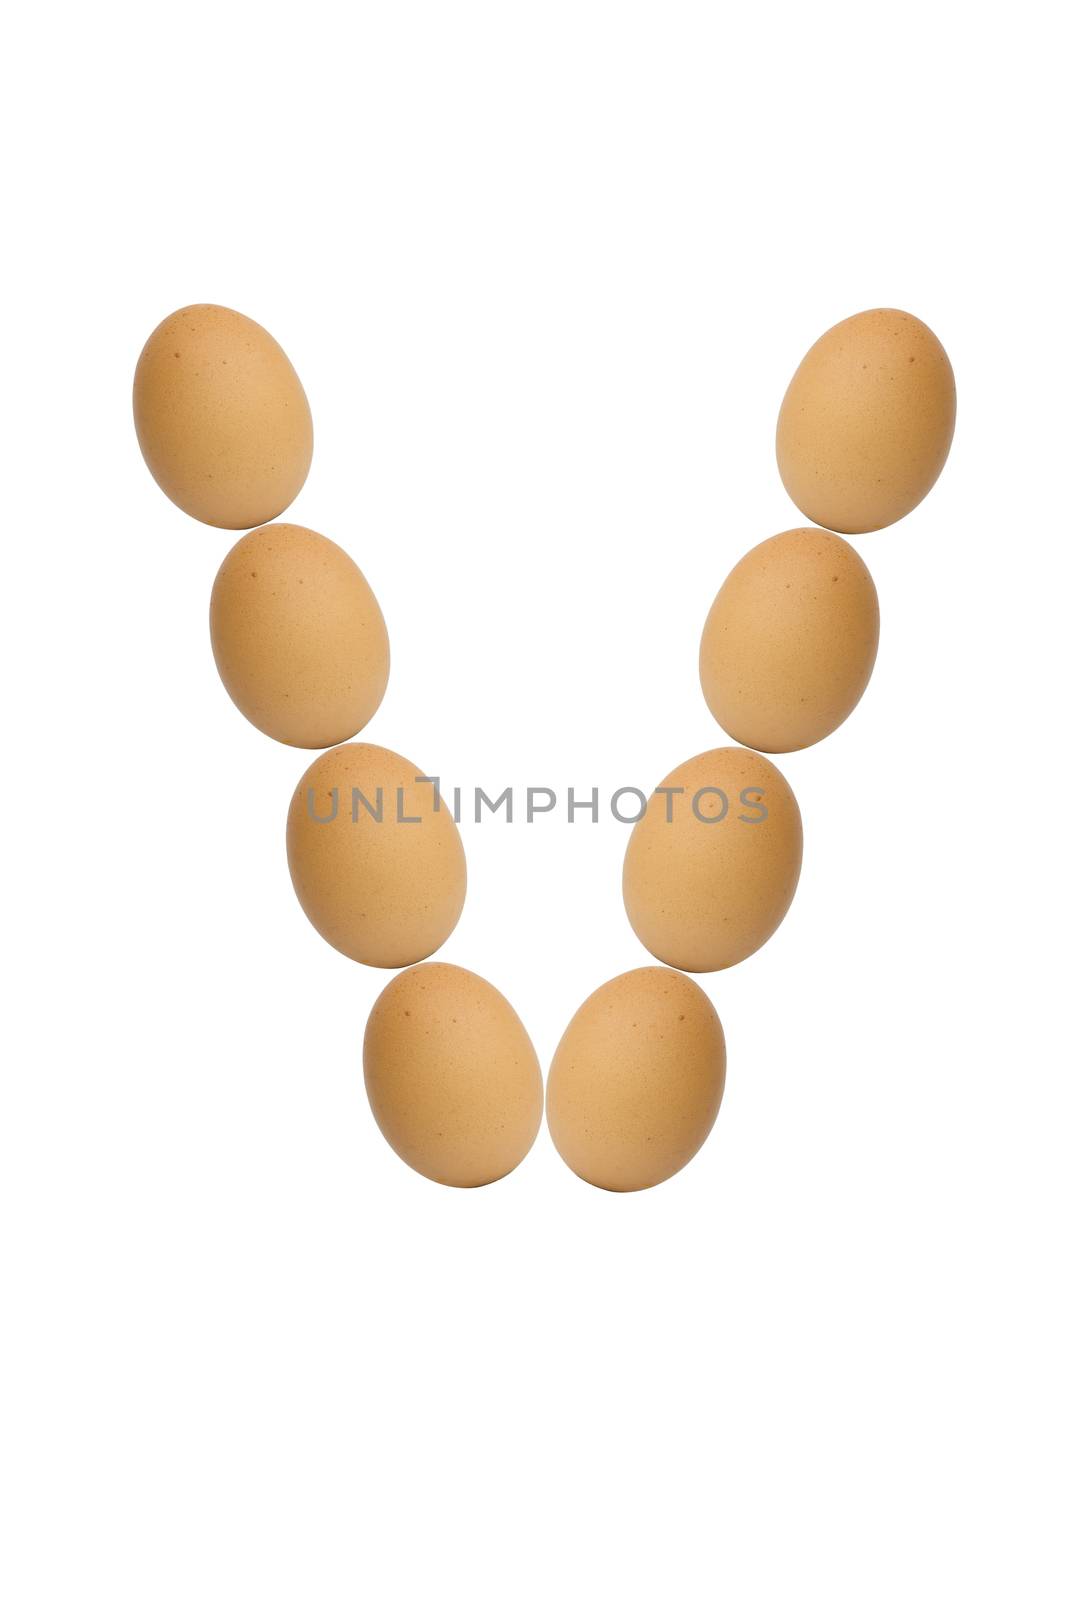 Alphabets  A to Z from brown eggs alphabet isolated on white background, V